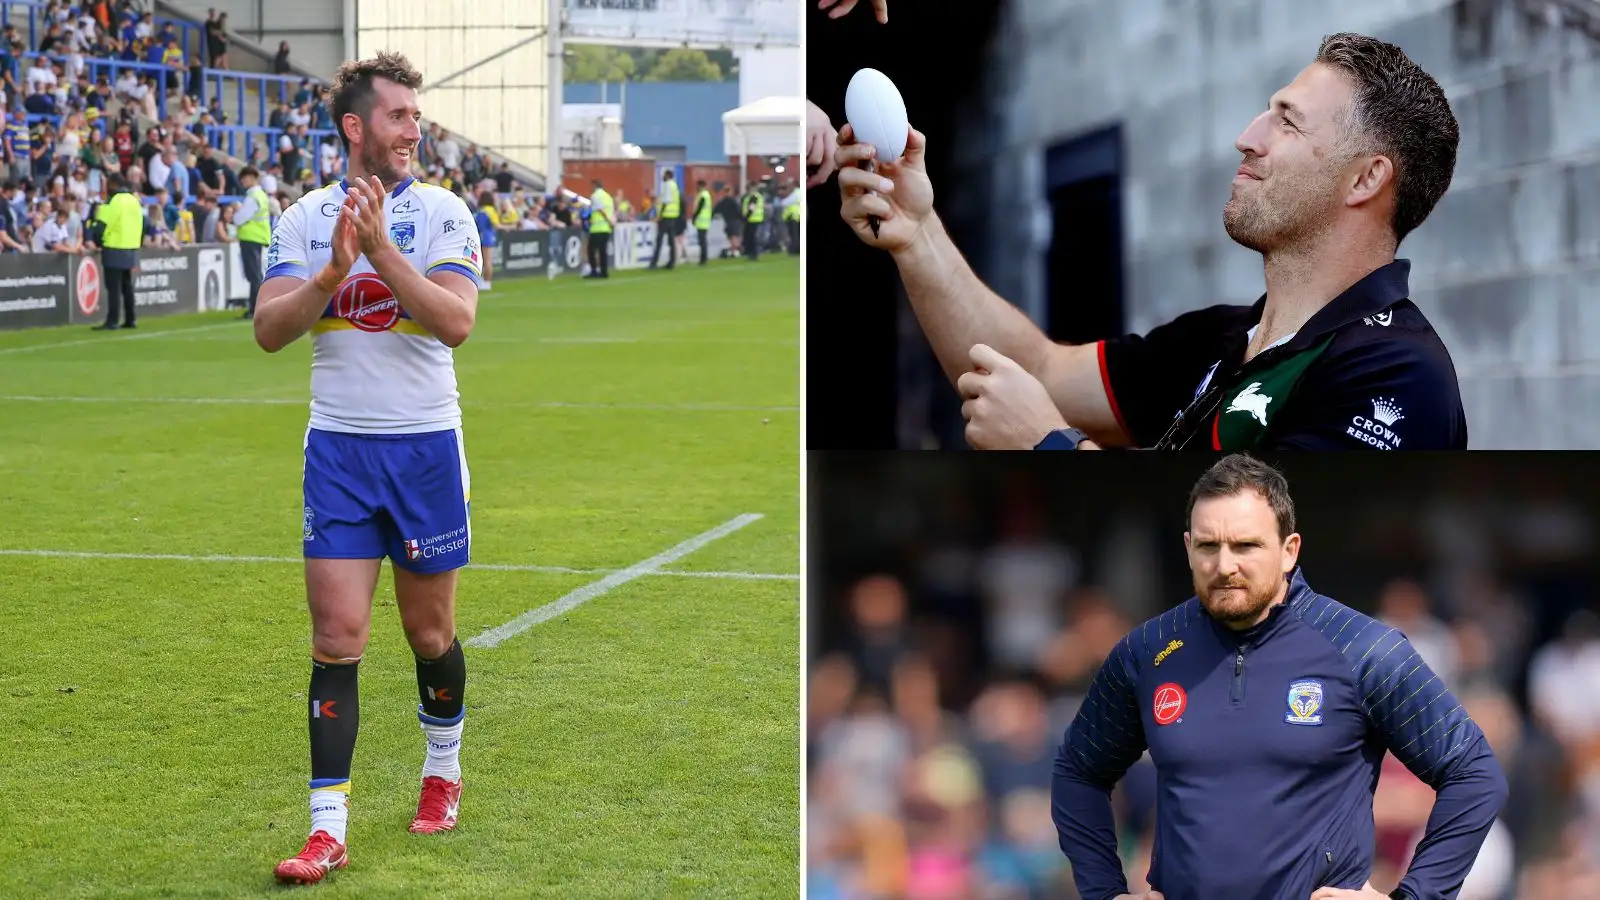 Exclusive: Stefan Ratchford can’t wait to work with ‘unbelievable’ Sam Burgess, attributes Warrington Wolves’ re-awakening to ‘brilliant’ Martin Gleeson